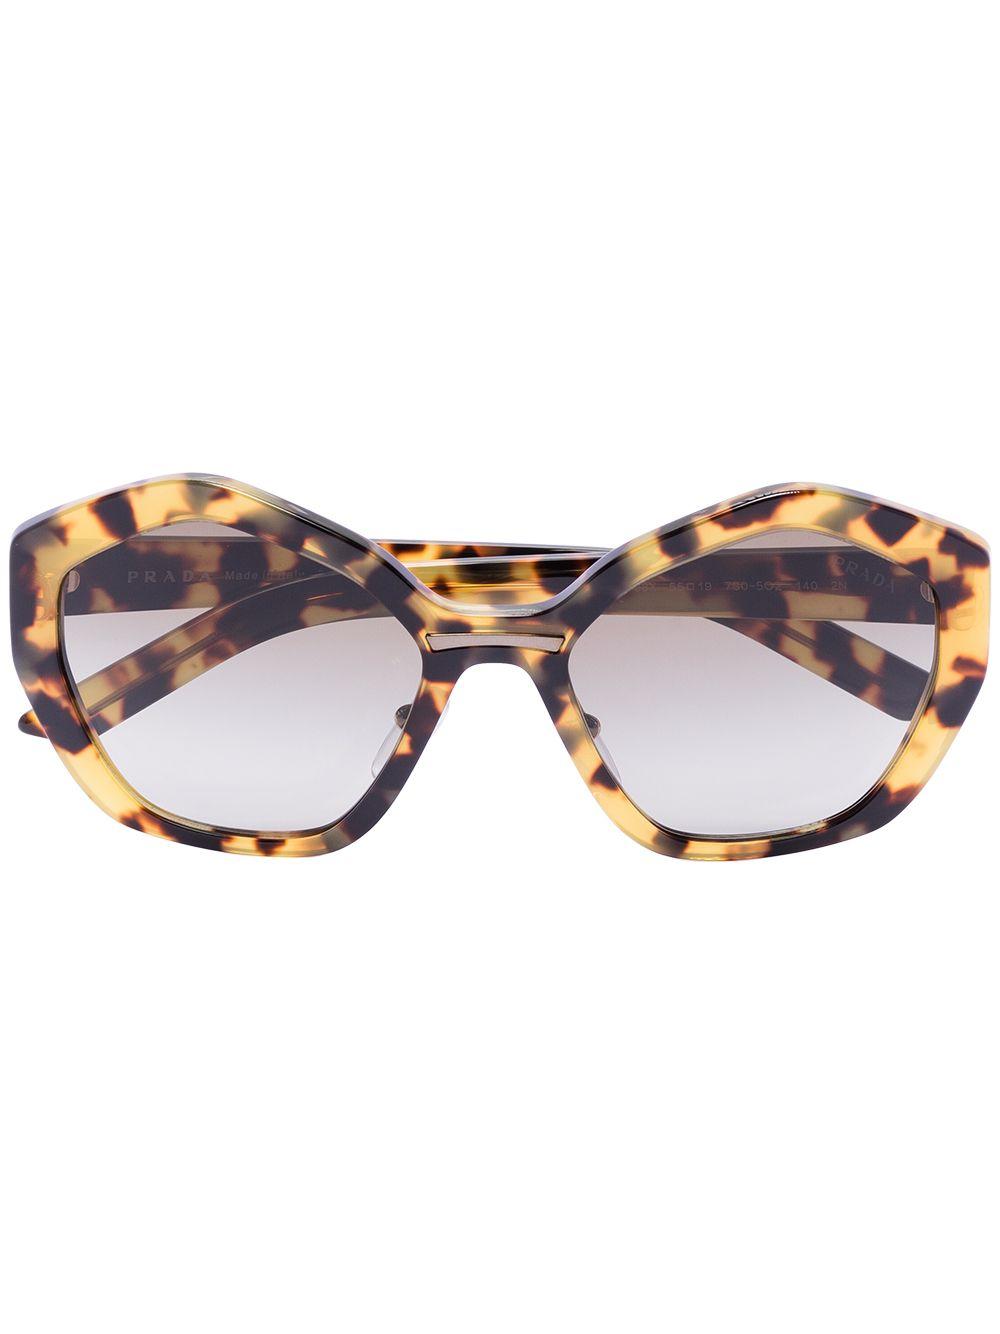 Prada Synthetic Hexagon Lens Tinted Sunglasses in Brown - Lyst